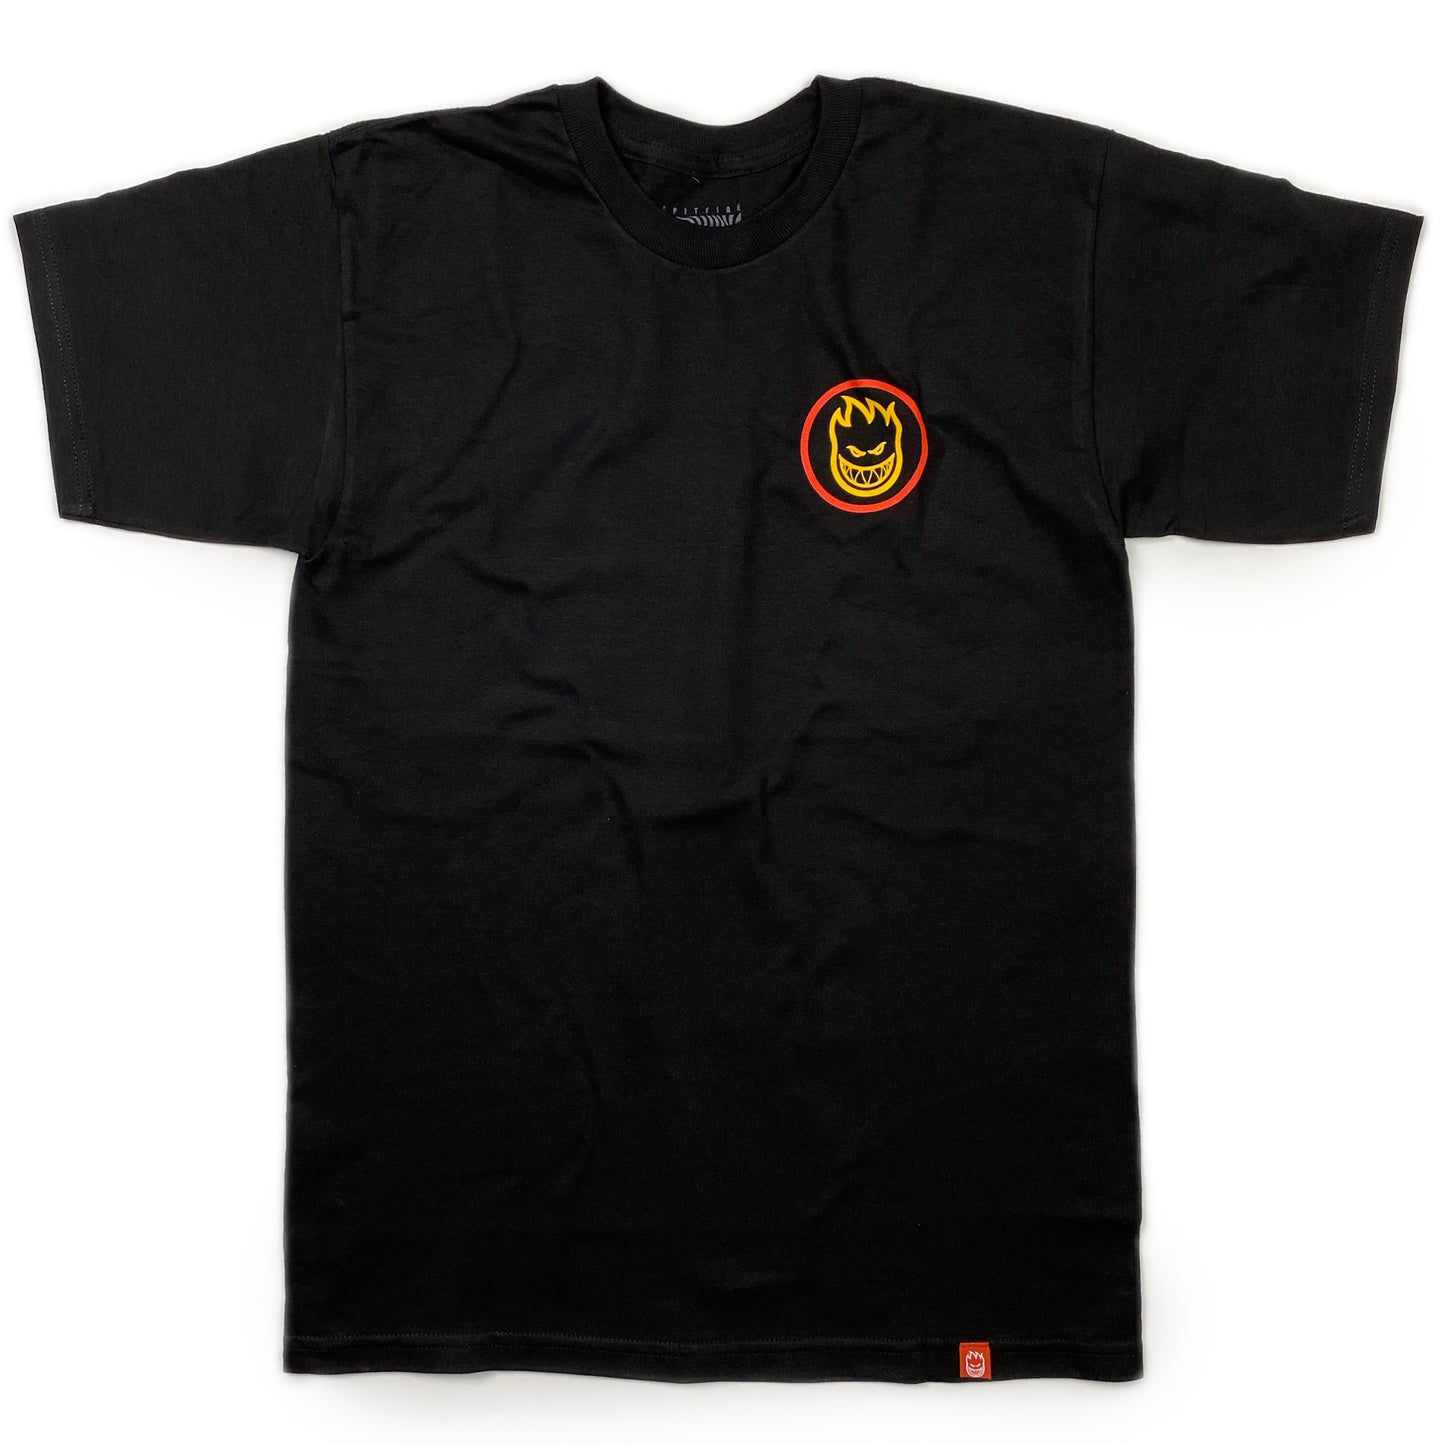 Spitfire Classic Swirl T Shirt - Black / Red / Gold / Olive - Prime Delux Store